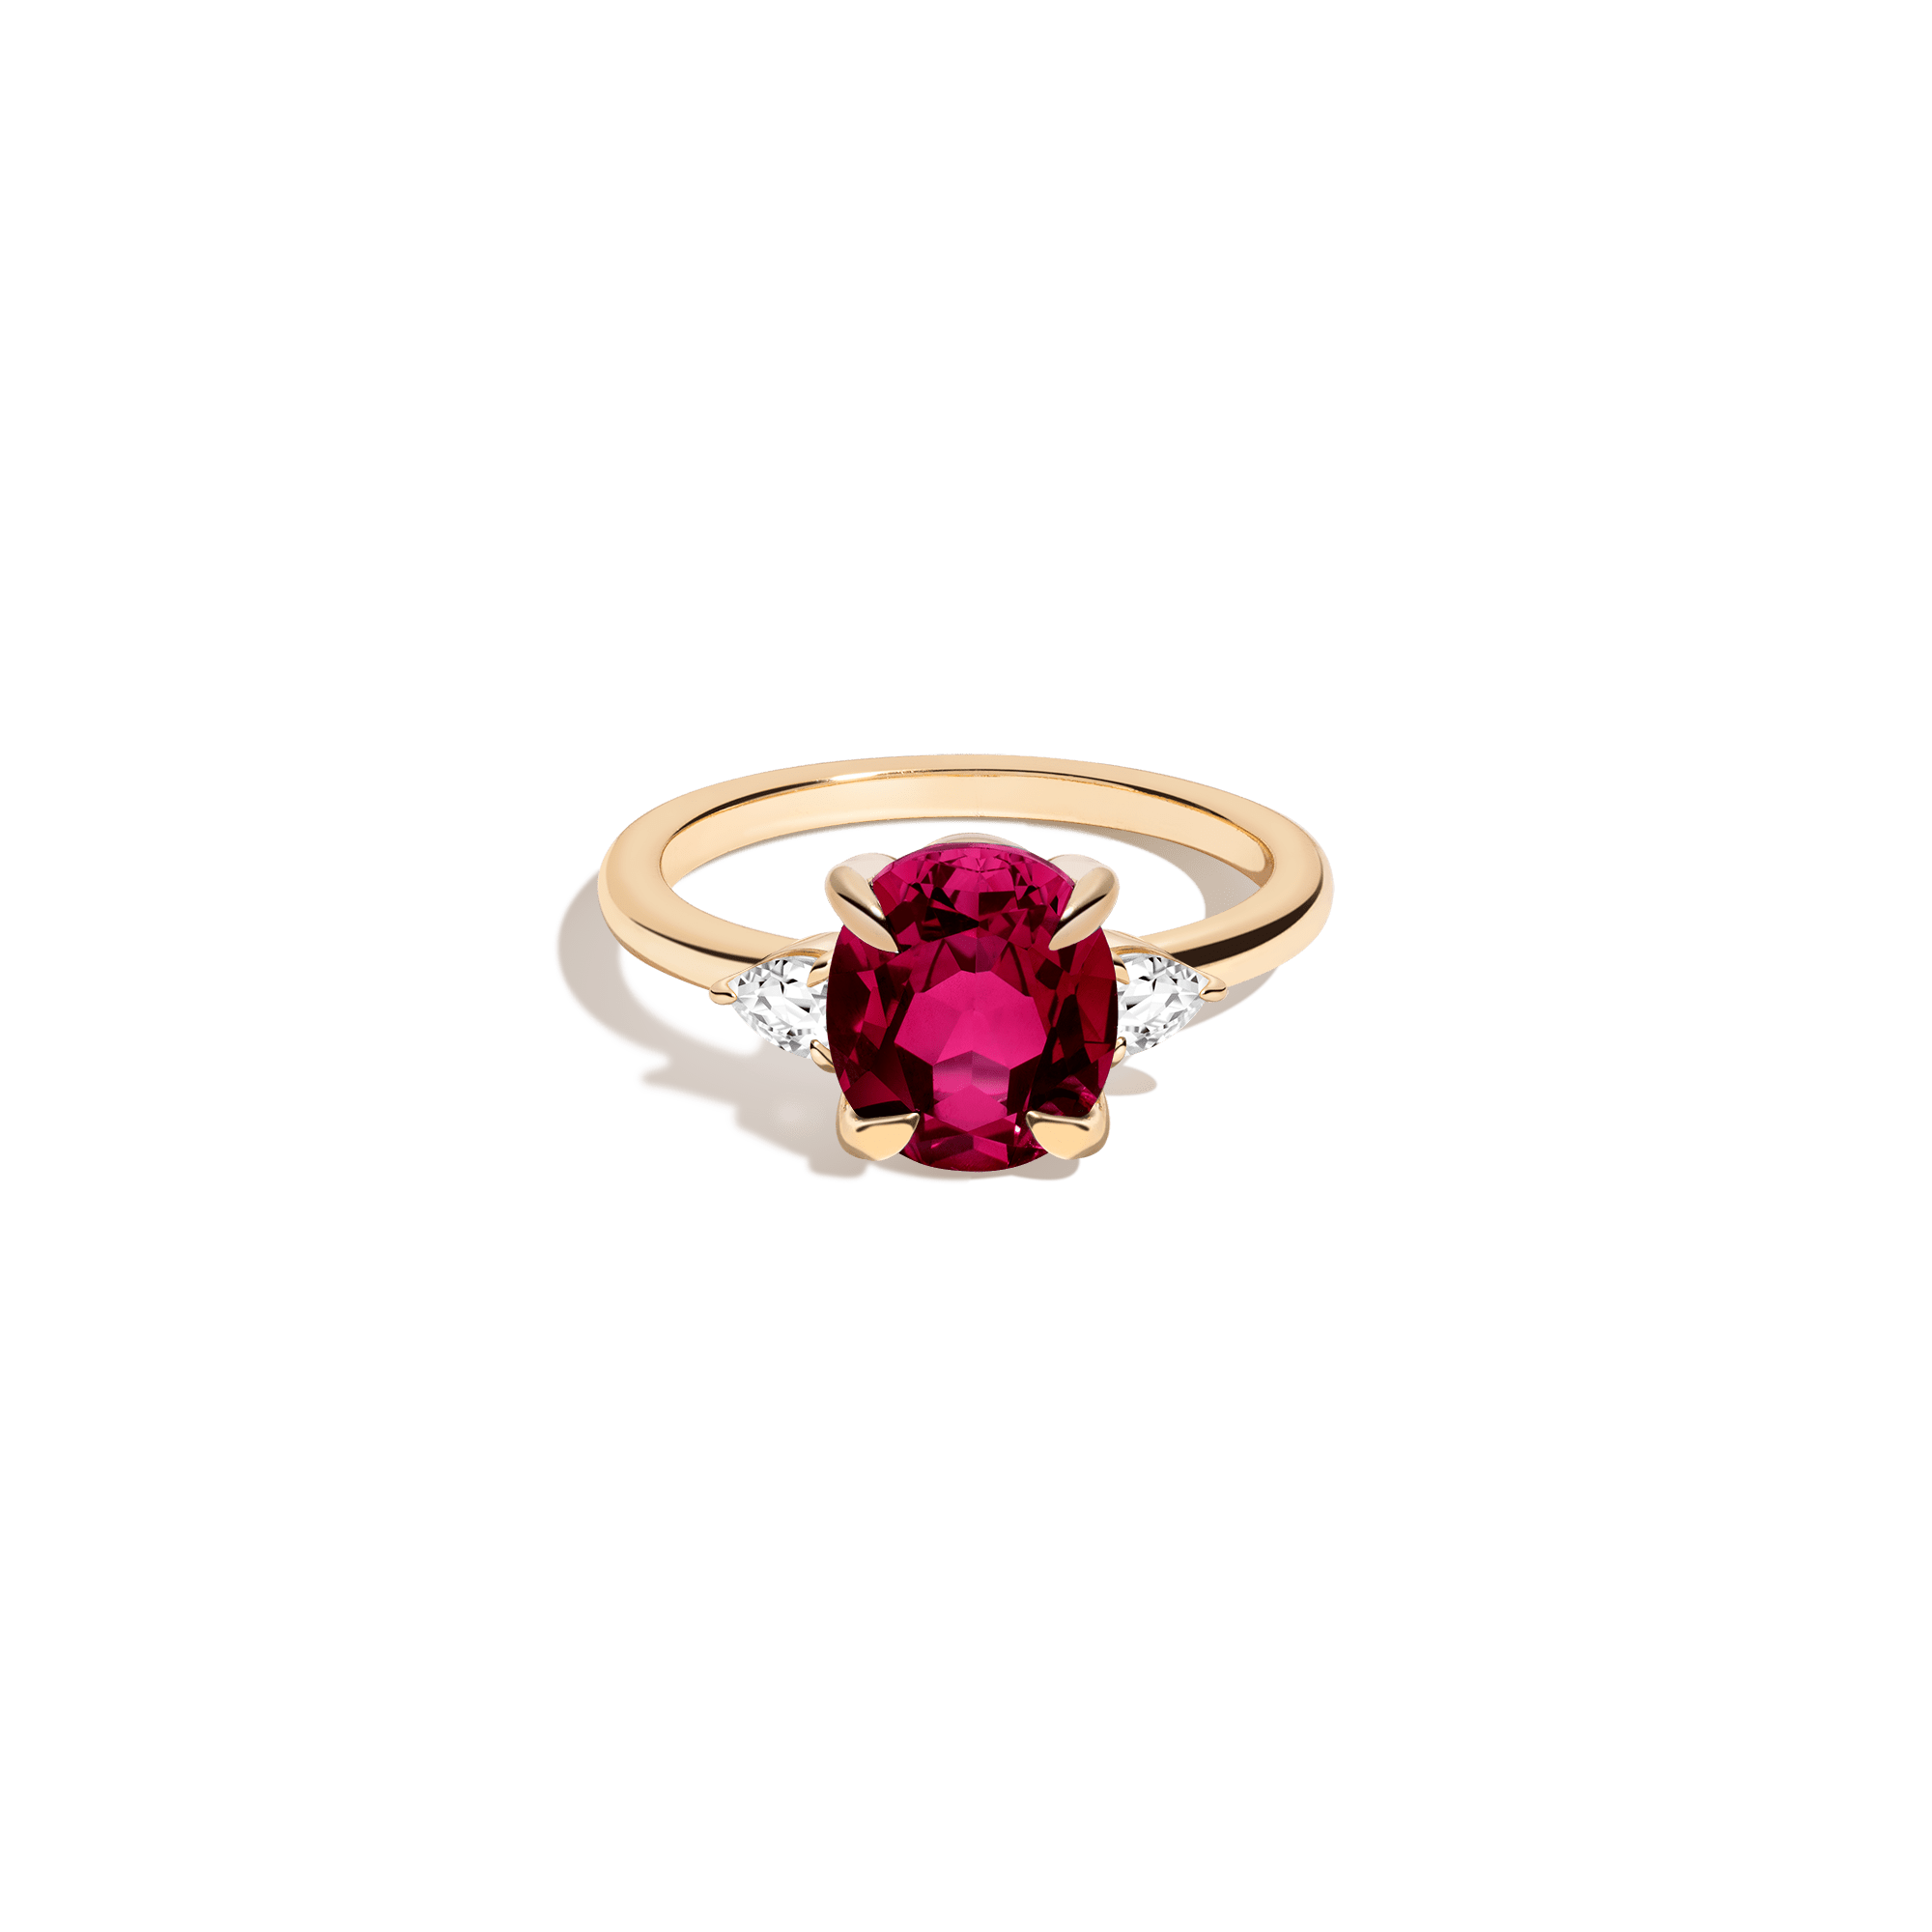 Shop Aurate New York Oval Gemstone Cocktail Ring - Red Ruby In Rose